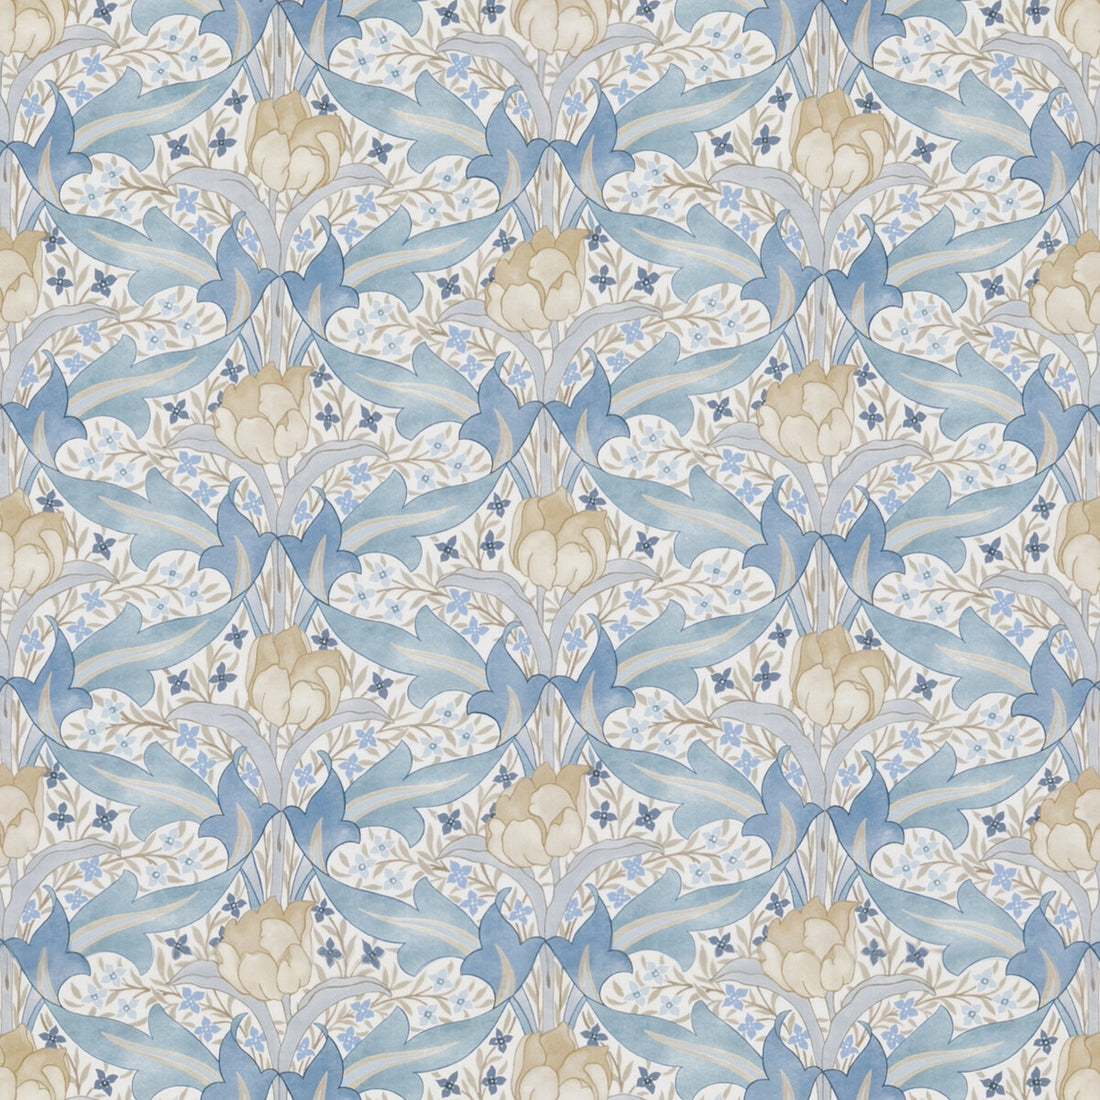 Tulip &amp; Jasmine Cotton fabric in blue color - pattern BP10977.2.0 - by G P &amp; J Baker in the Original Brantwood Fabric collection